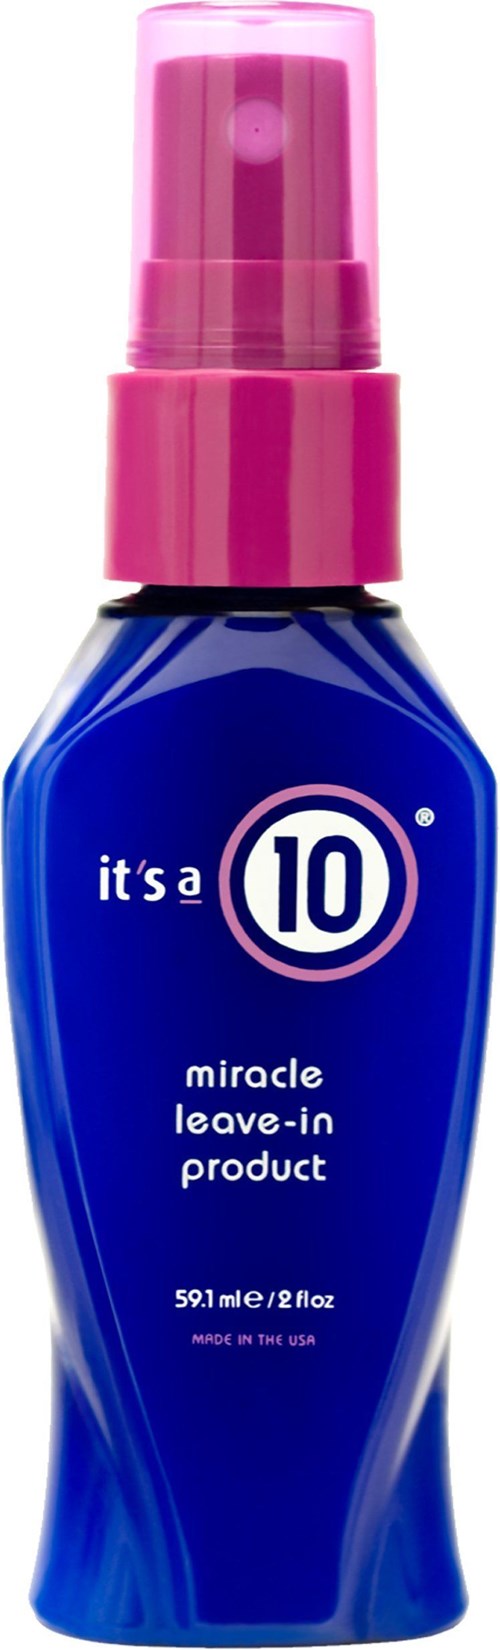 It's a 10 Miracle Leave-In Product, $18